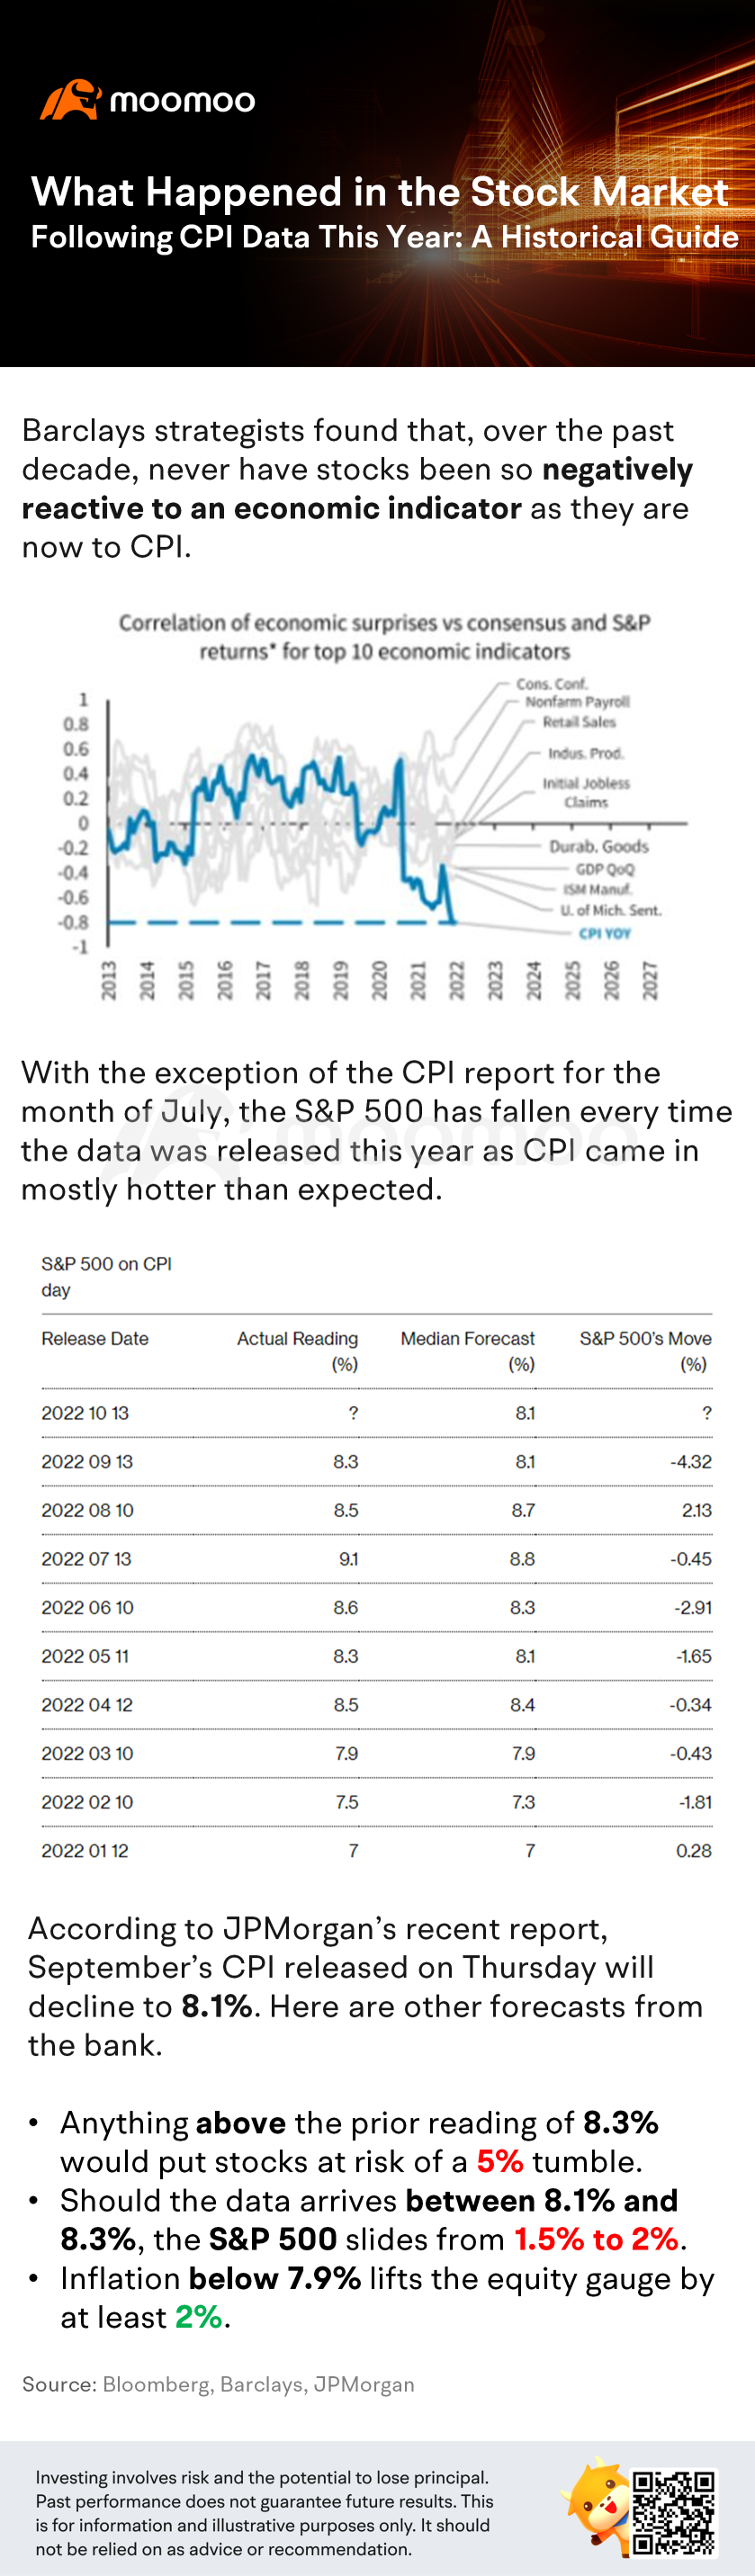 What Happened in the Stock Market Following CPI Data This Year: A Historical Guide